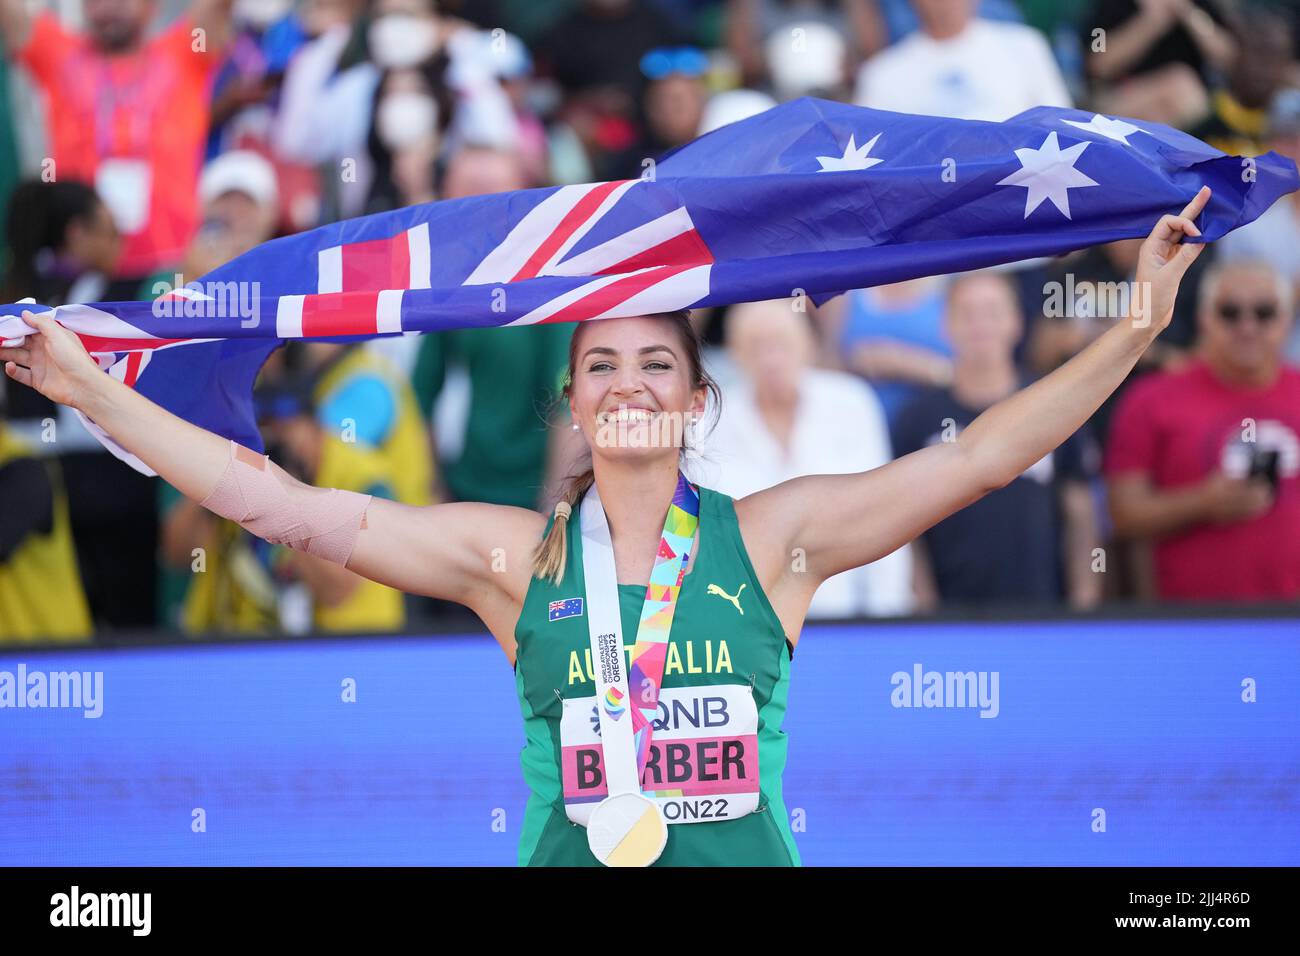 Eugene, USA. 22nd July, 2022. Kelsey-Lee Barber of Australia celebrates after the women's javelin throw final at the World Athletics Championships Oregon22 in Eugene, Oregon, the United States, July 22, 2022. Credit: Wu Xiaoling/Xinhua/Alamy Live News Stock Photo